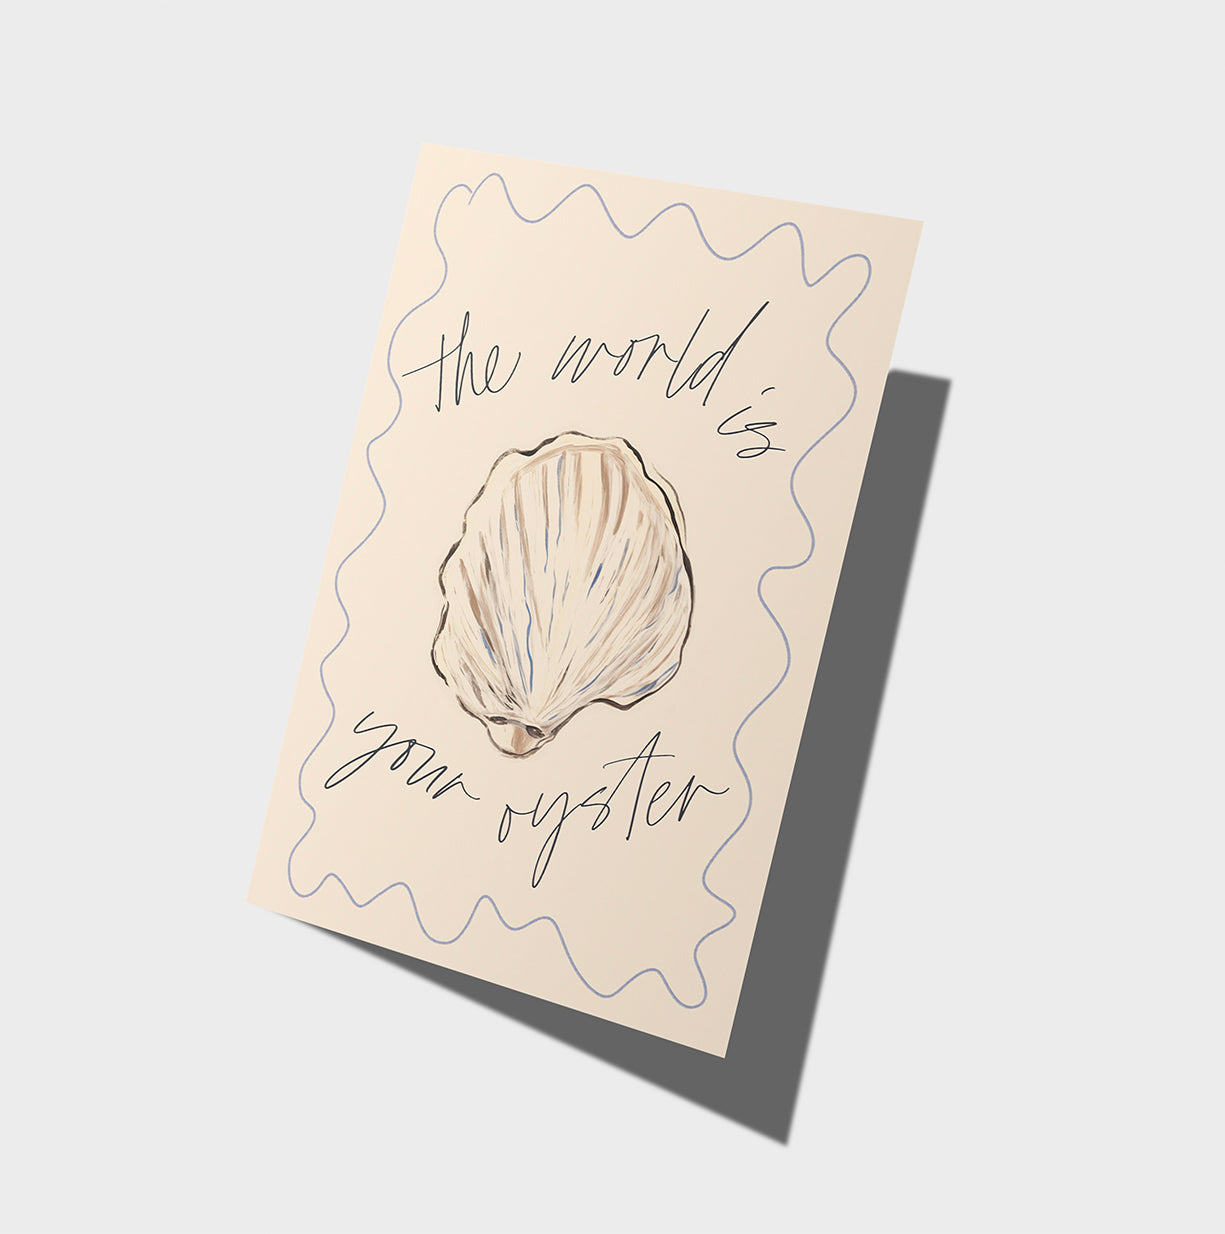 The World Is Your Oyster Card | Hand Drawn Illustration | Celebration Card | Well Done | Appreciation